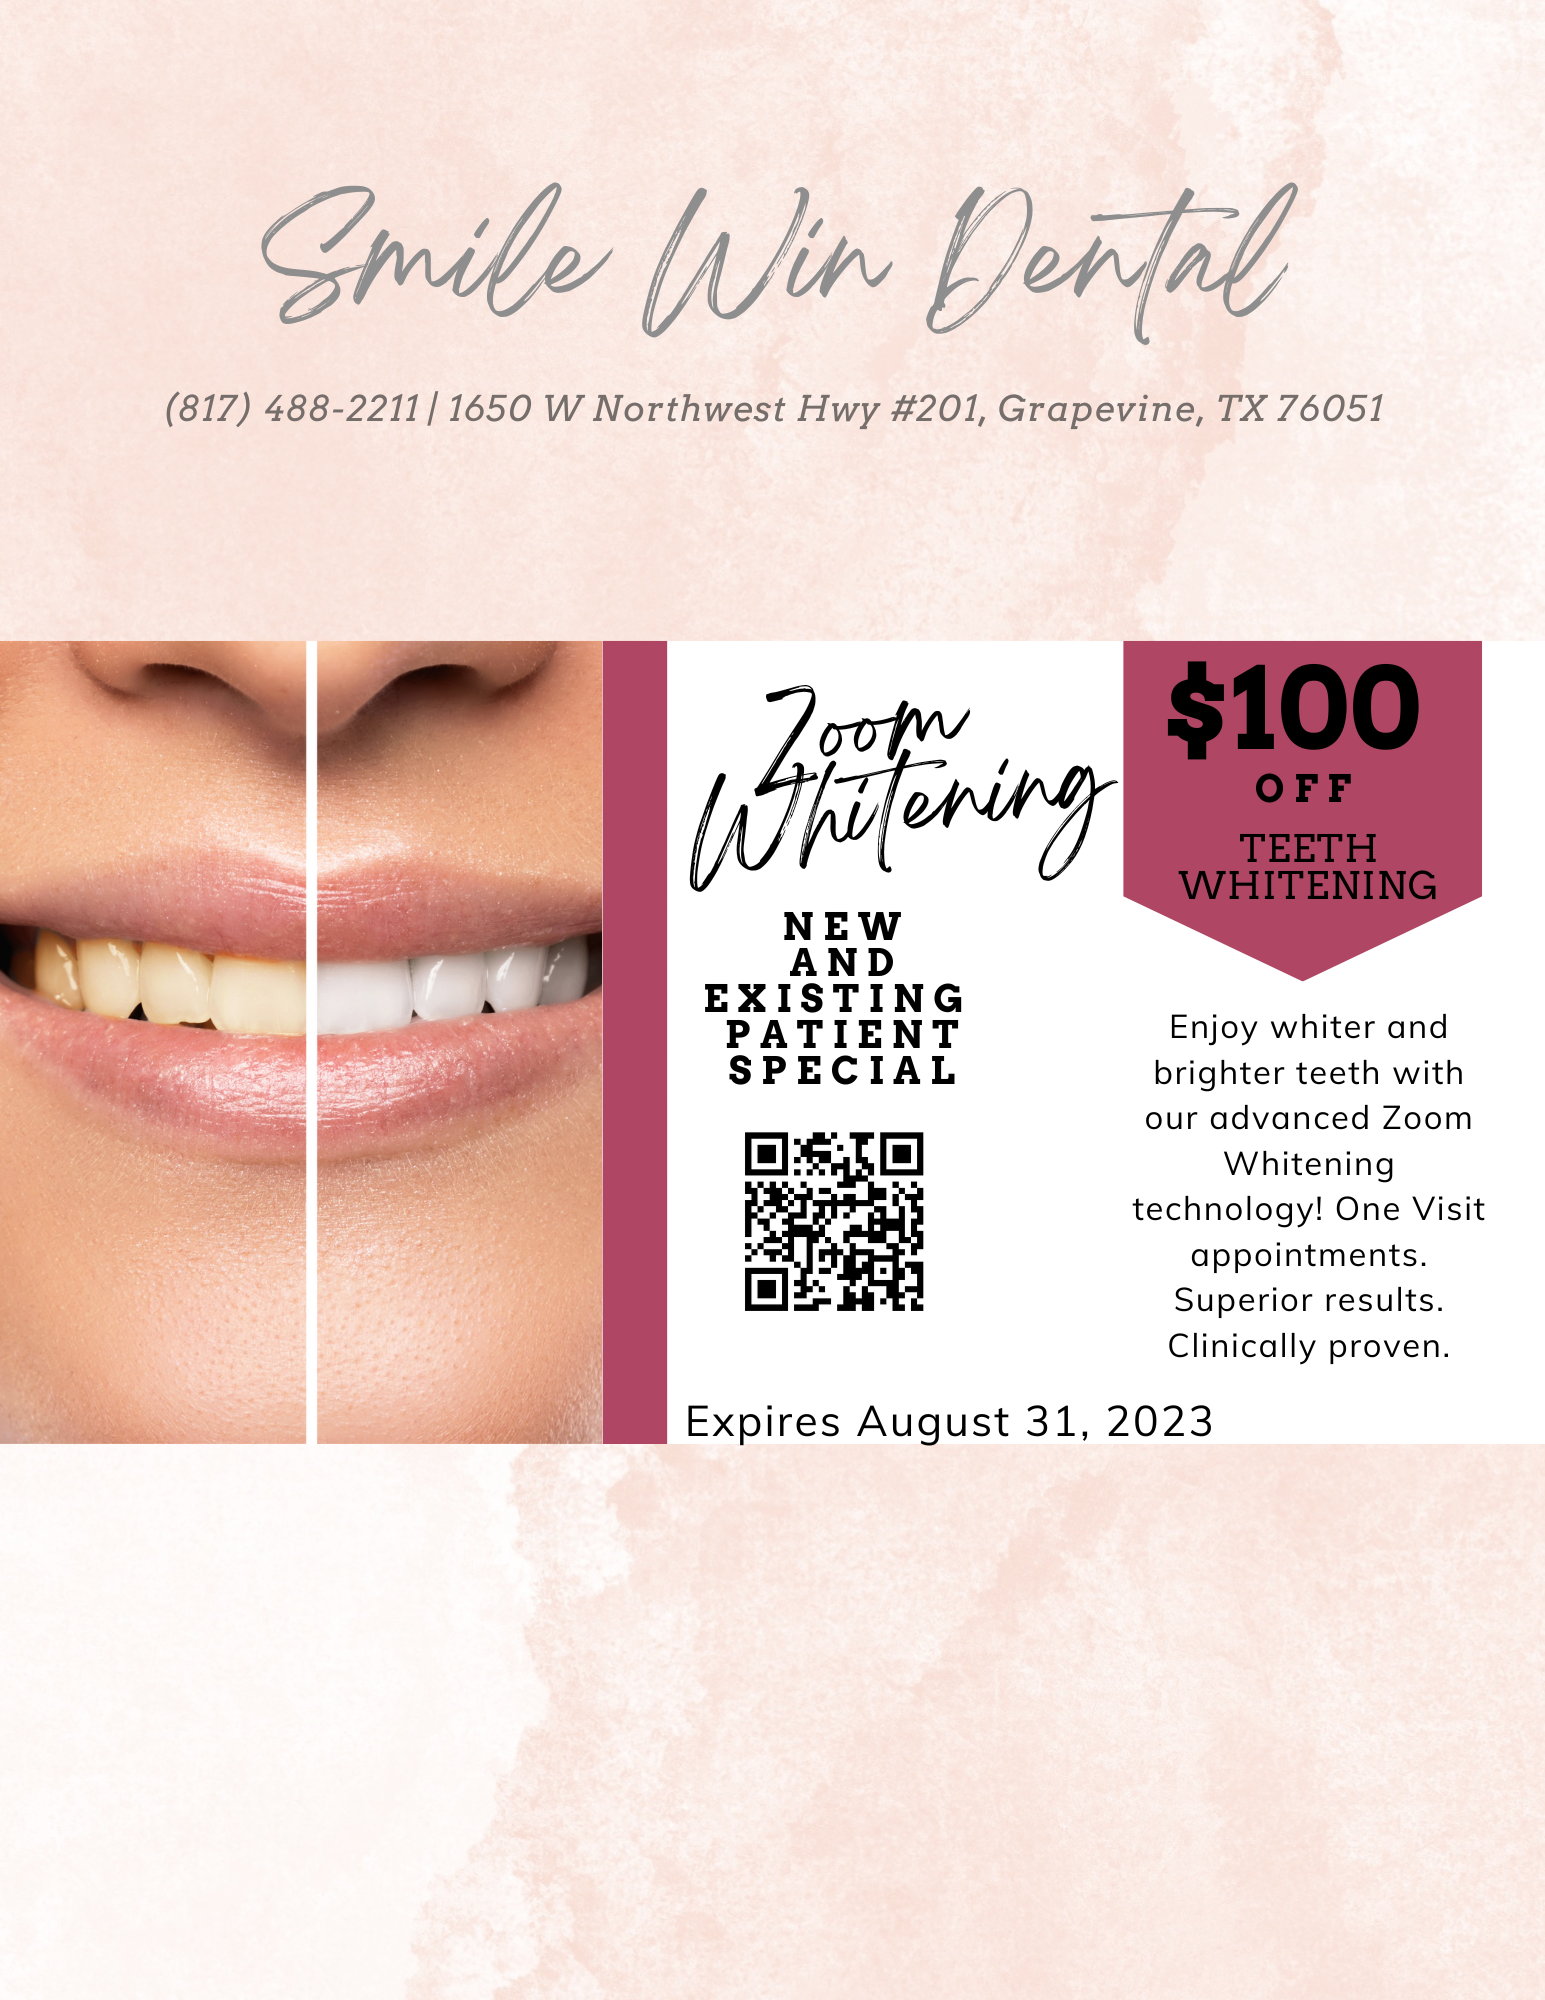 Teeth Whitening Service Special in Grapevine TX